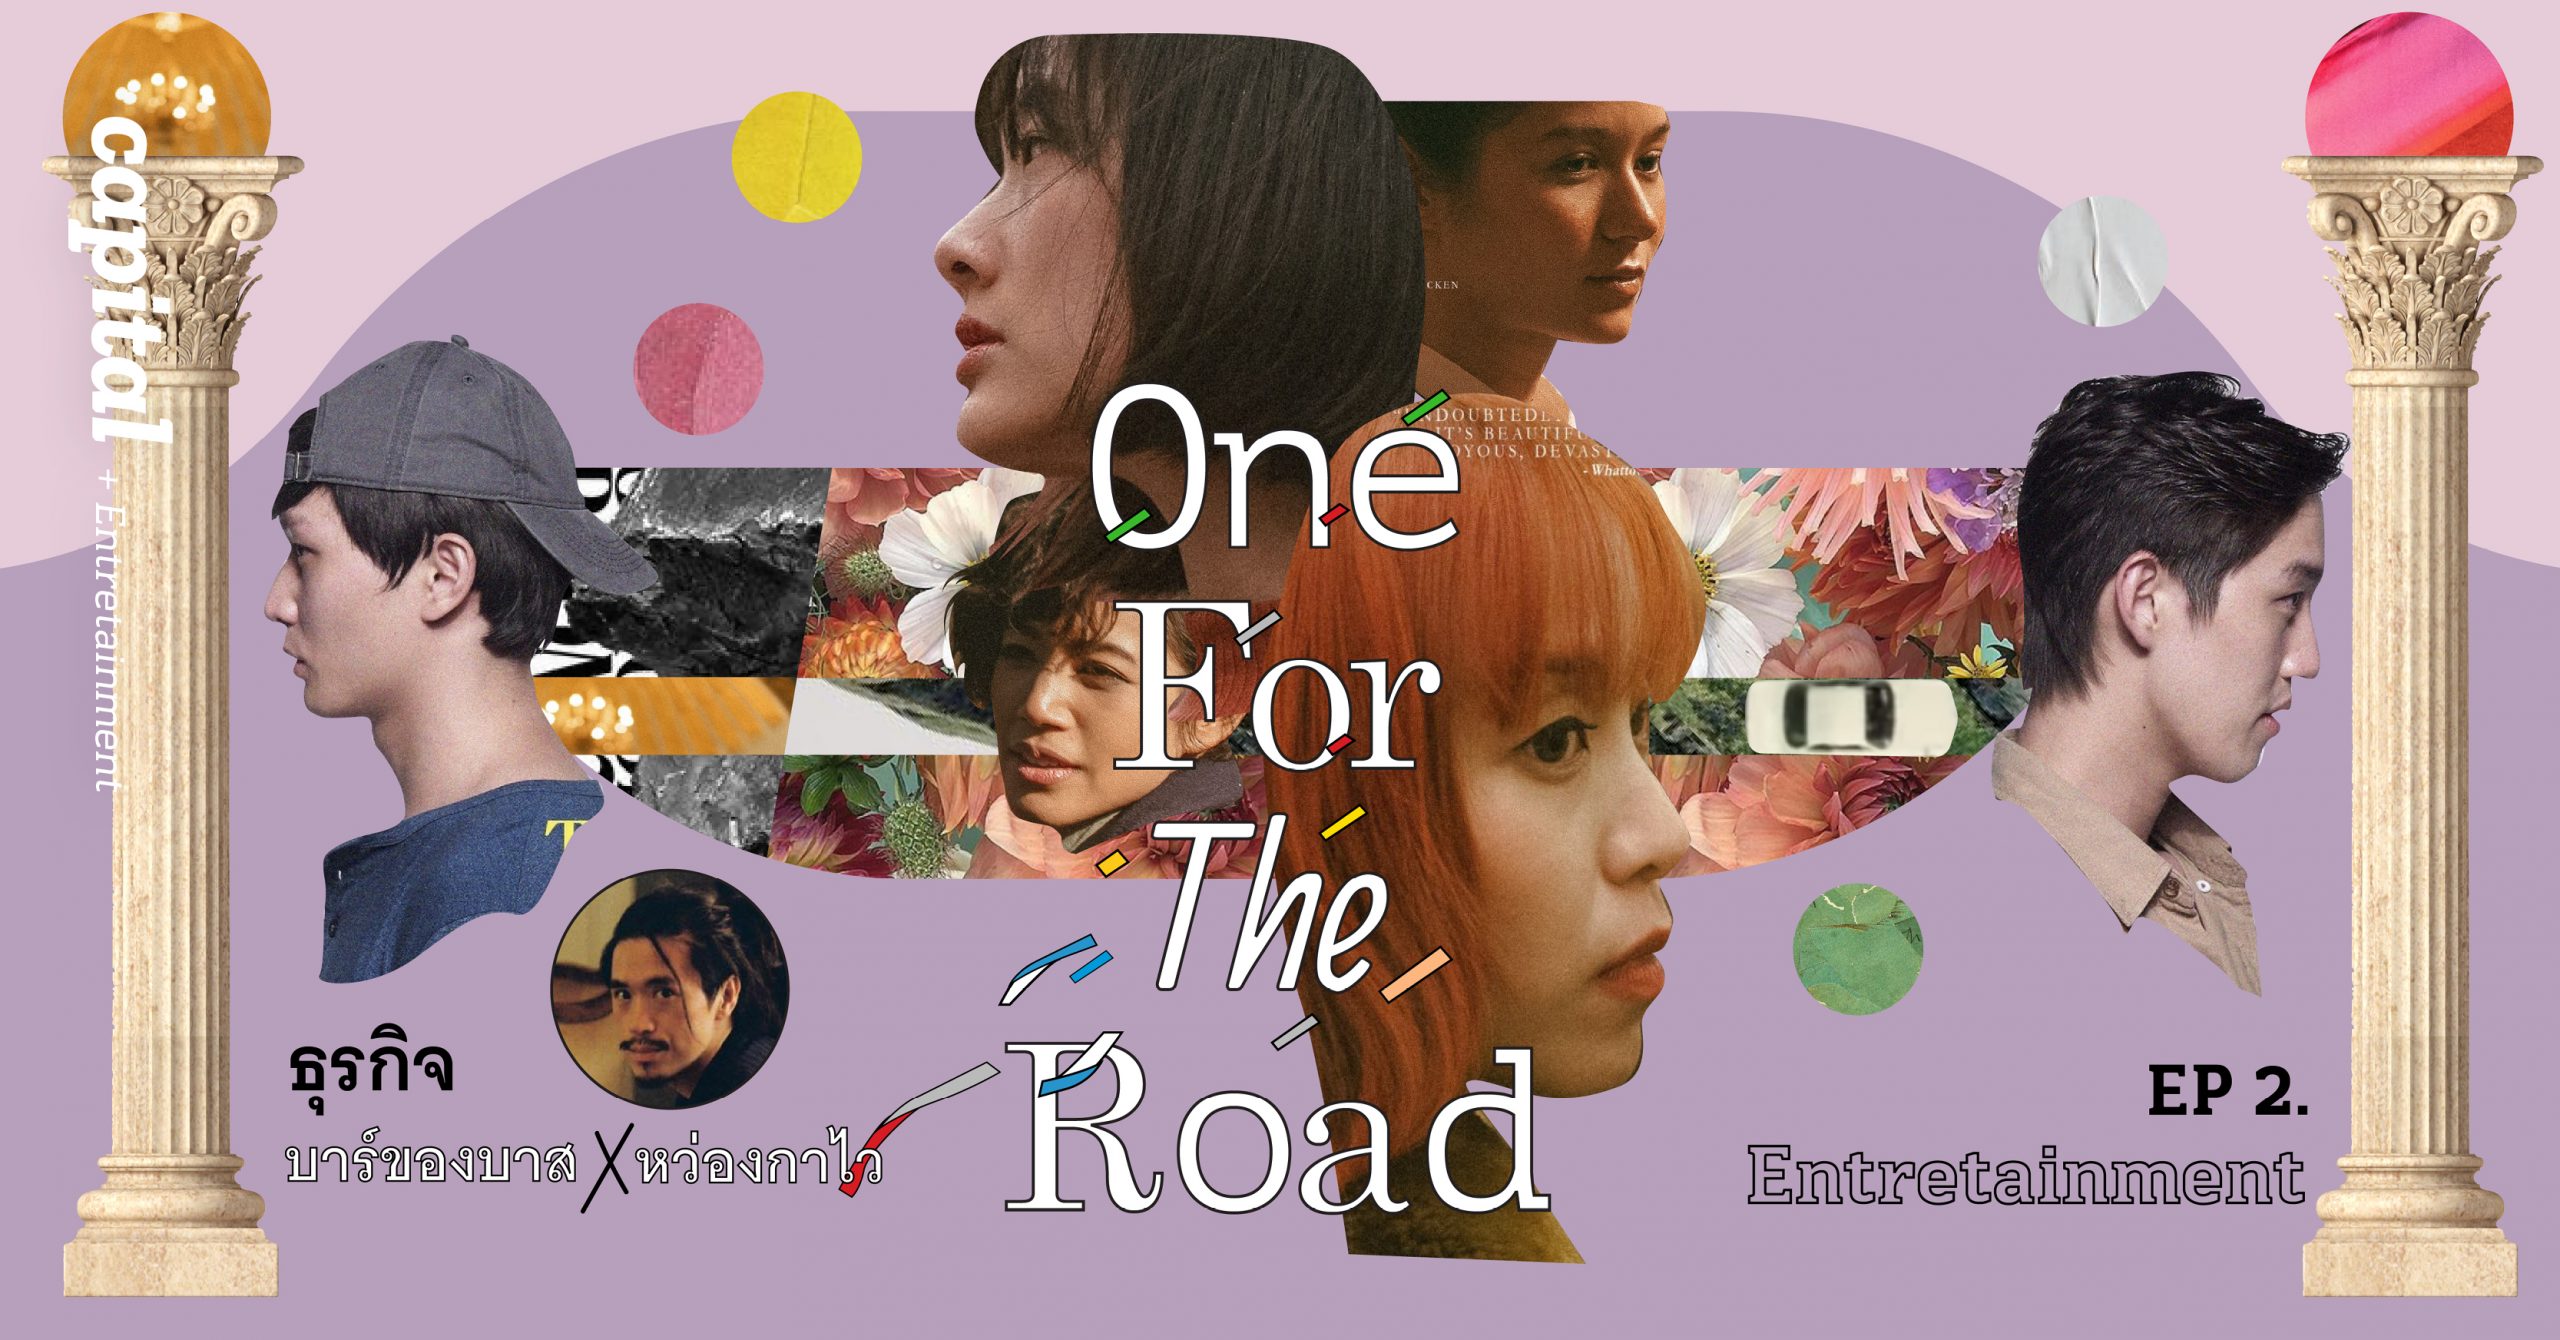 OFTR บาร์ที่คนดู One for the Road จบต้องมา – a day magazine